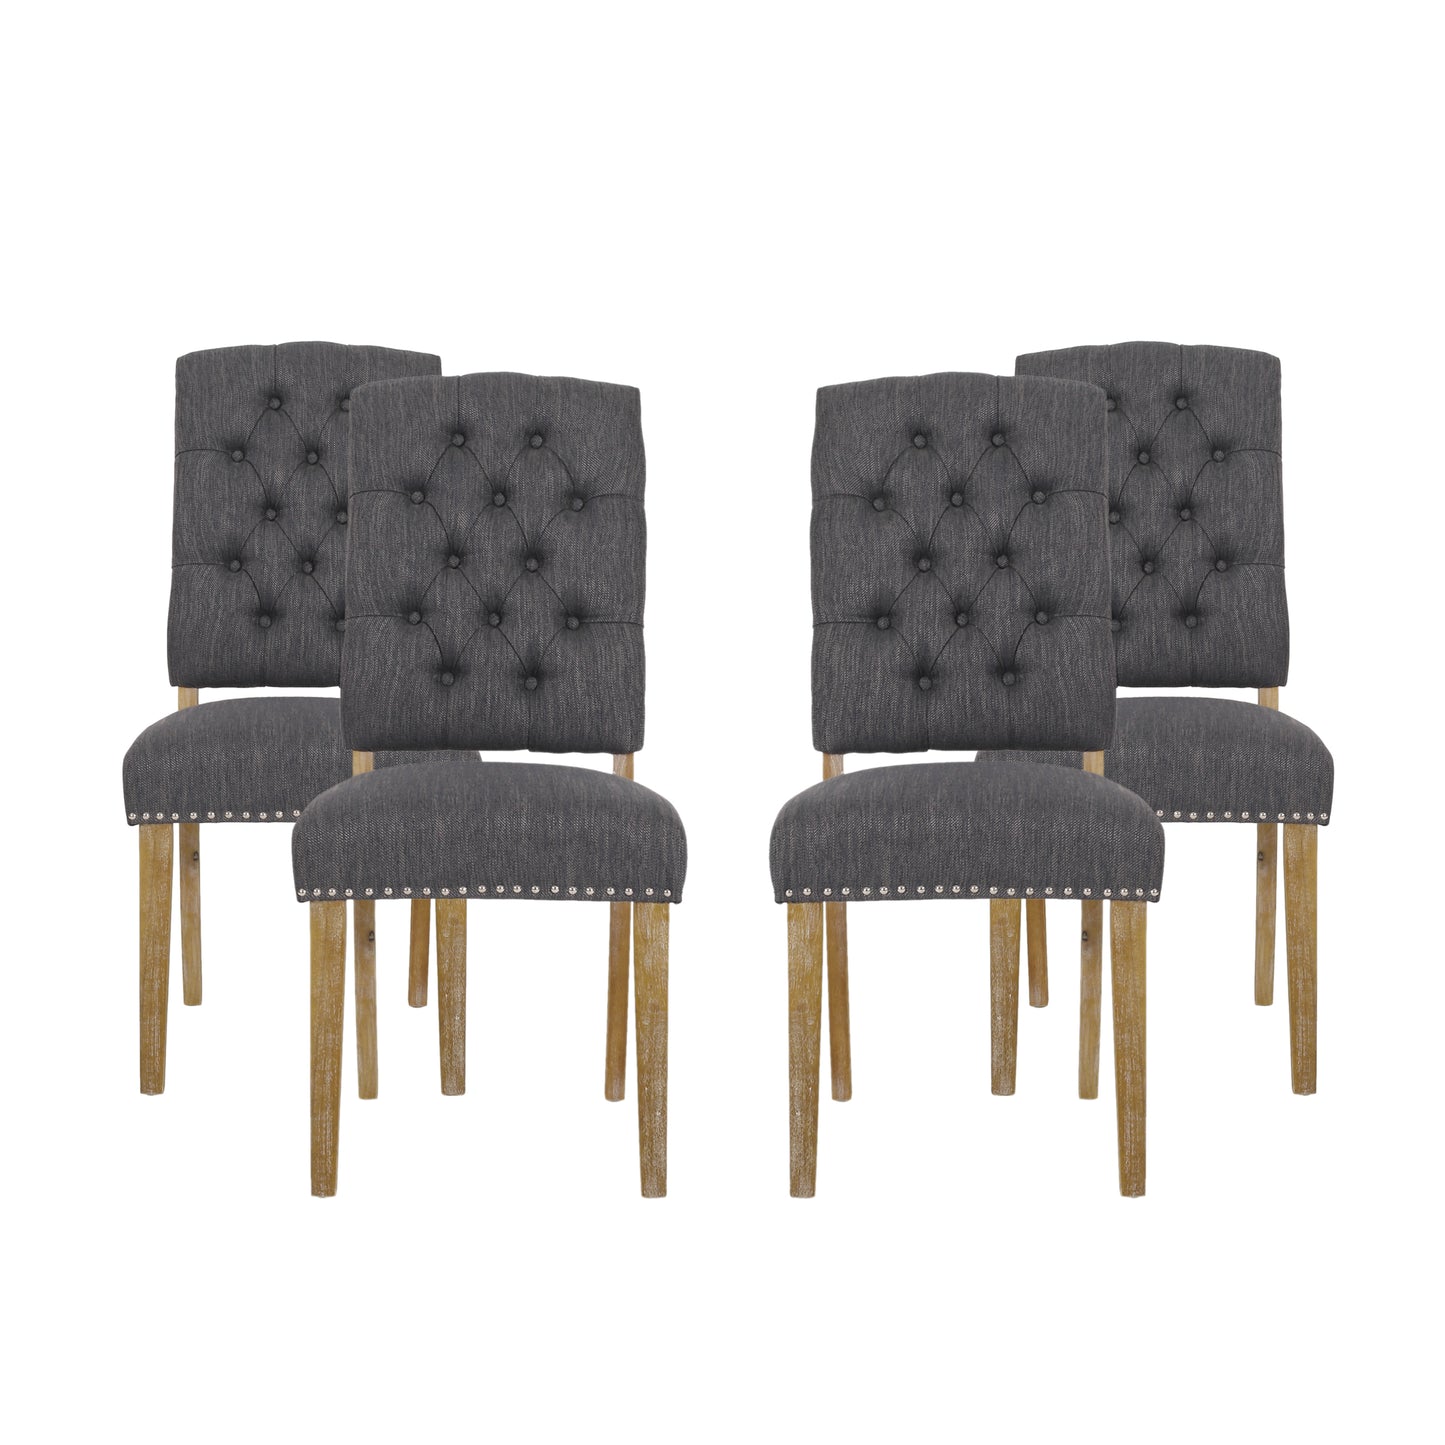 Frances Contemporary Fabric Tufted Dining Chairs with Nailhead Trim, Set of 4